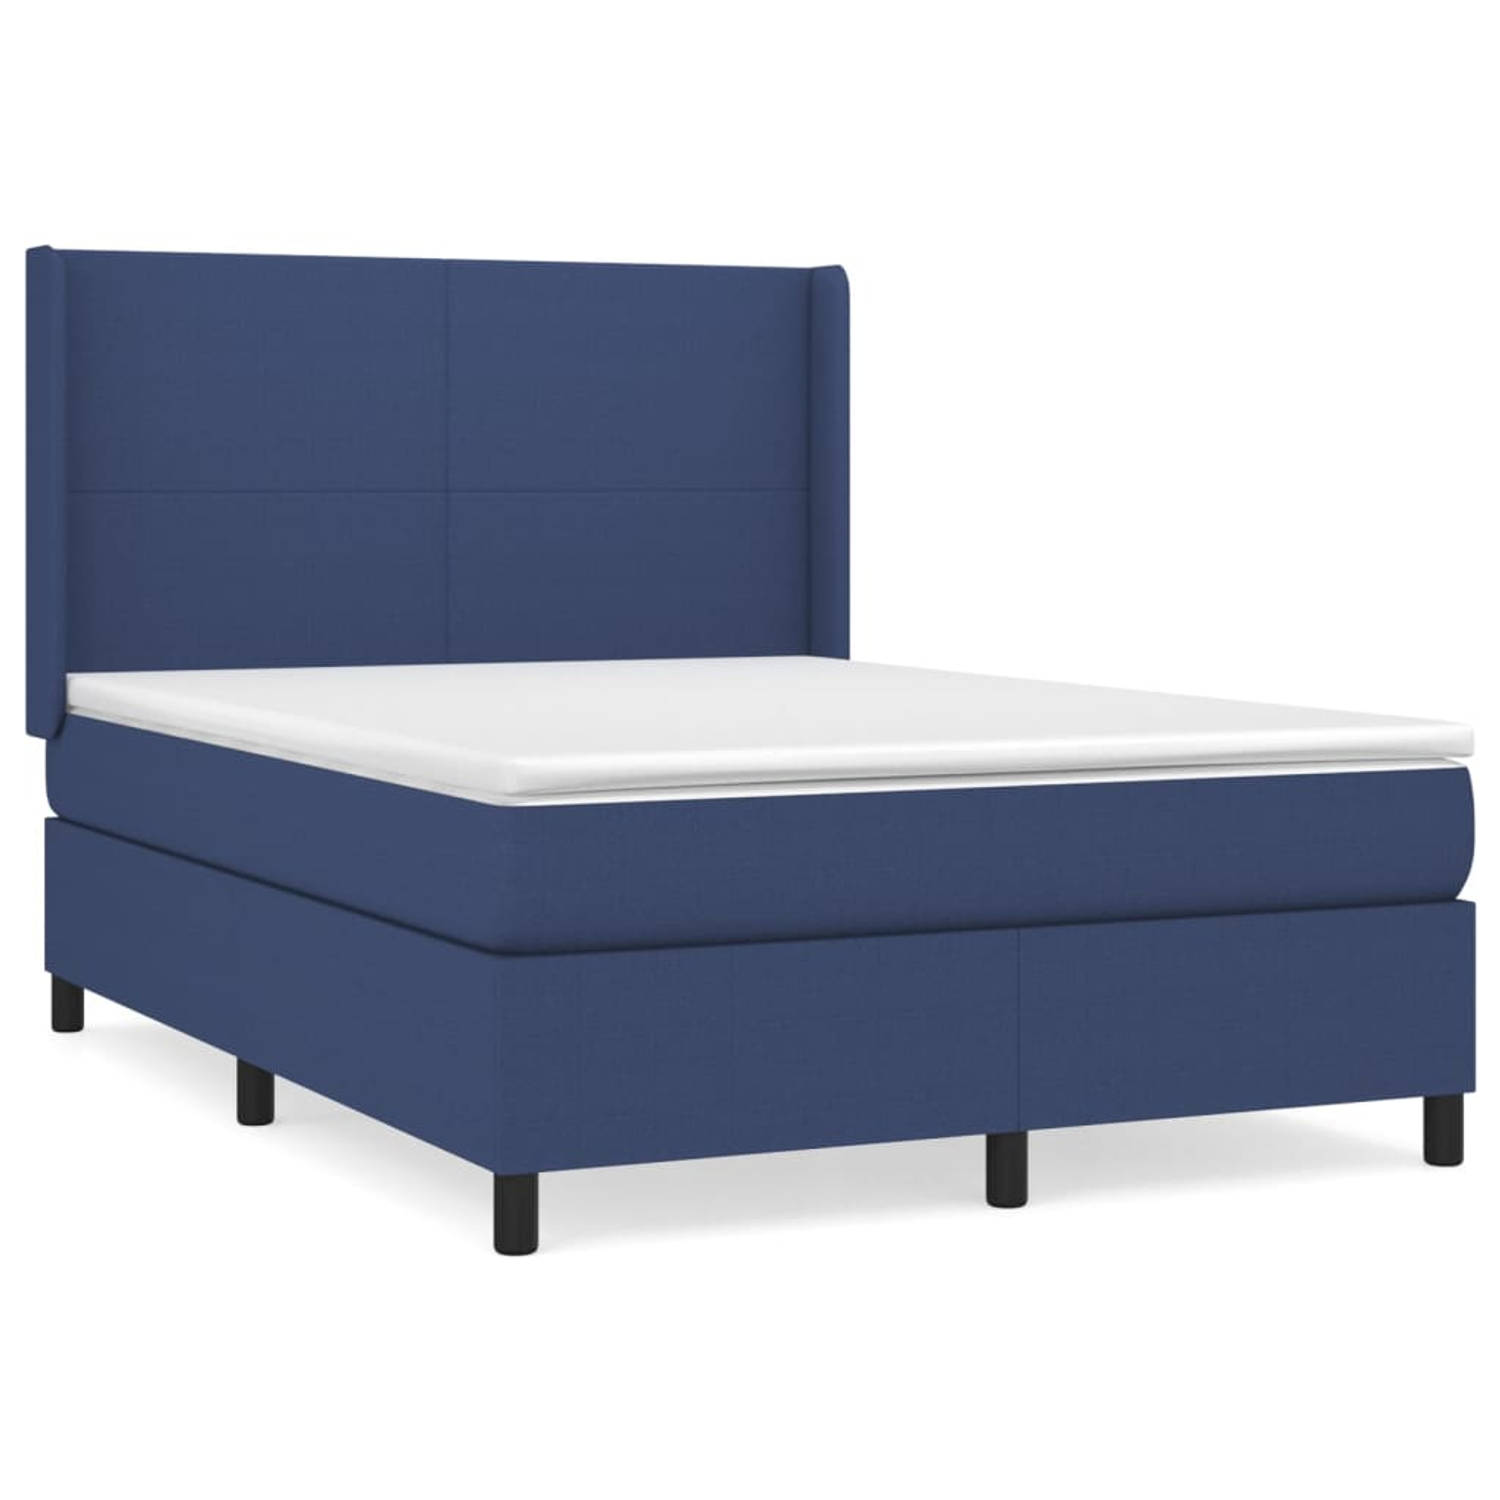 The Living Store Boxspringbed - Comfort - Bed - 193 x 147 x 118/128 cm - Blauw - Ademende en duurzame stof